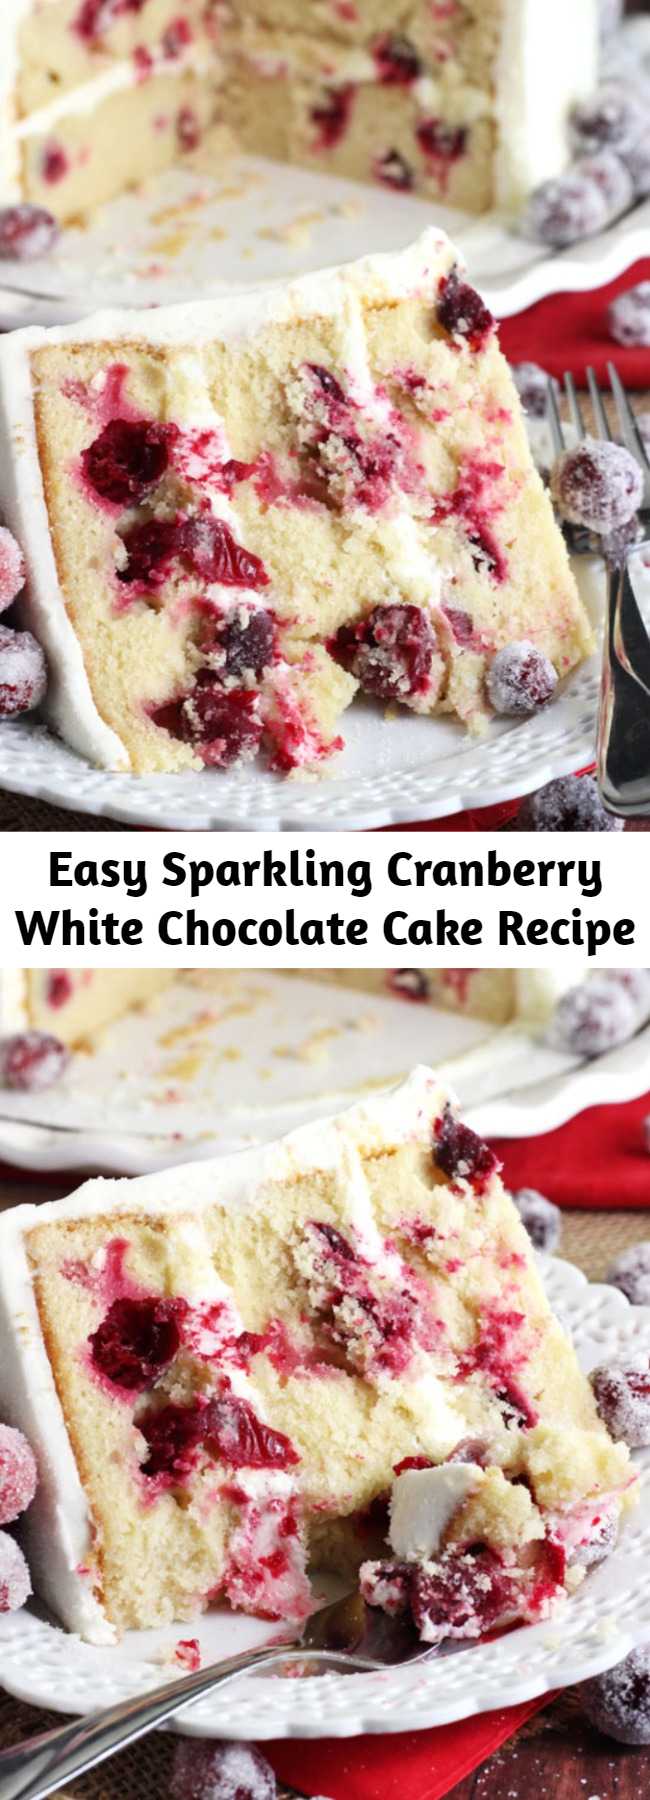 Easy Sparkling Cranberry White Chocolate Cake Recipe - This Sparkling Cranberry White Chocolate Cake recipe is no doubt a new favorite – especially for Christmas! The cake is incredibly moist and flavorful and the cranberries add the prefect burst of fruity flavor.